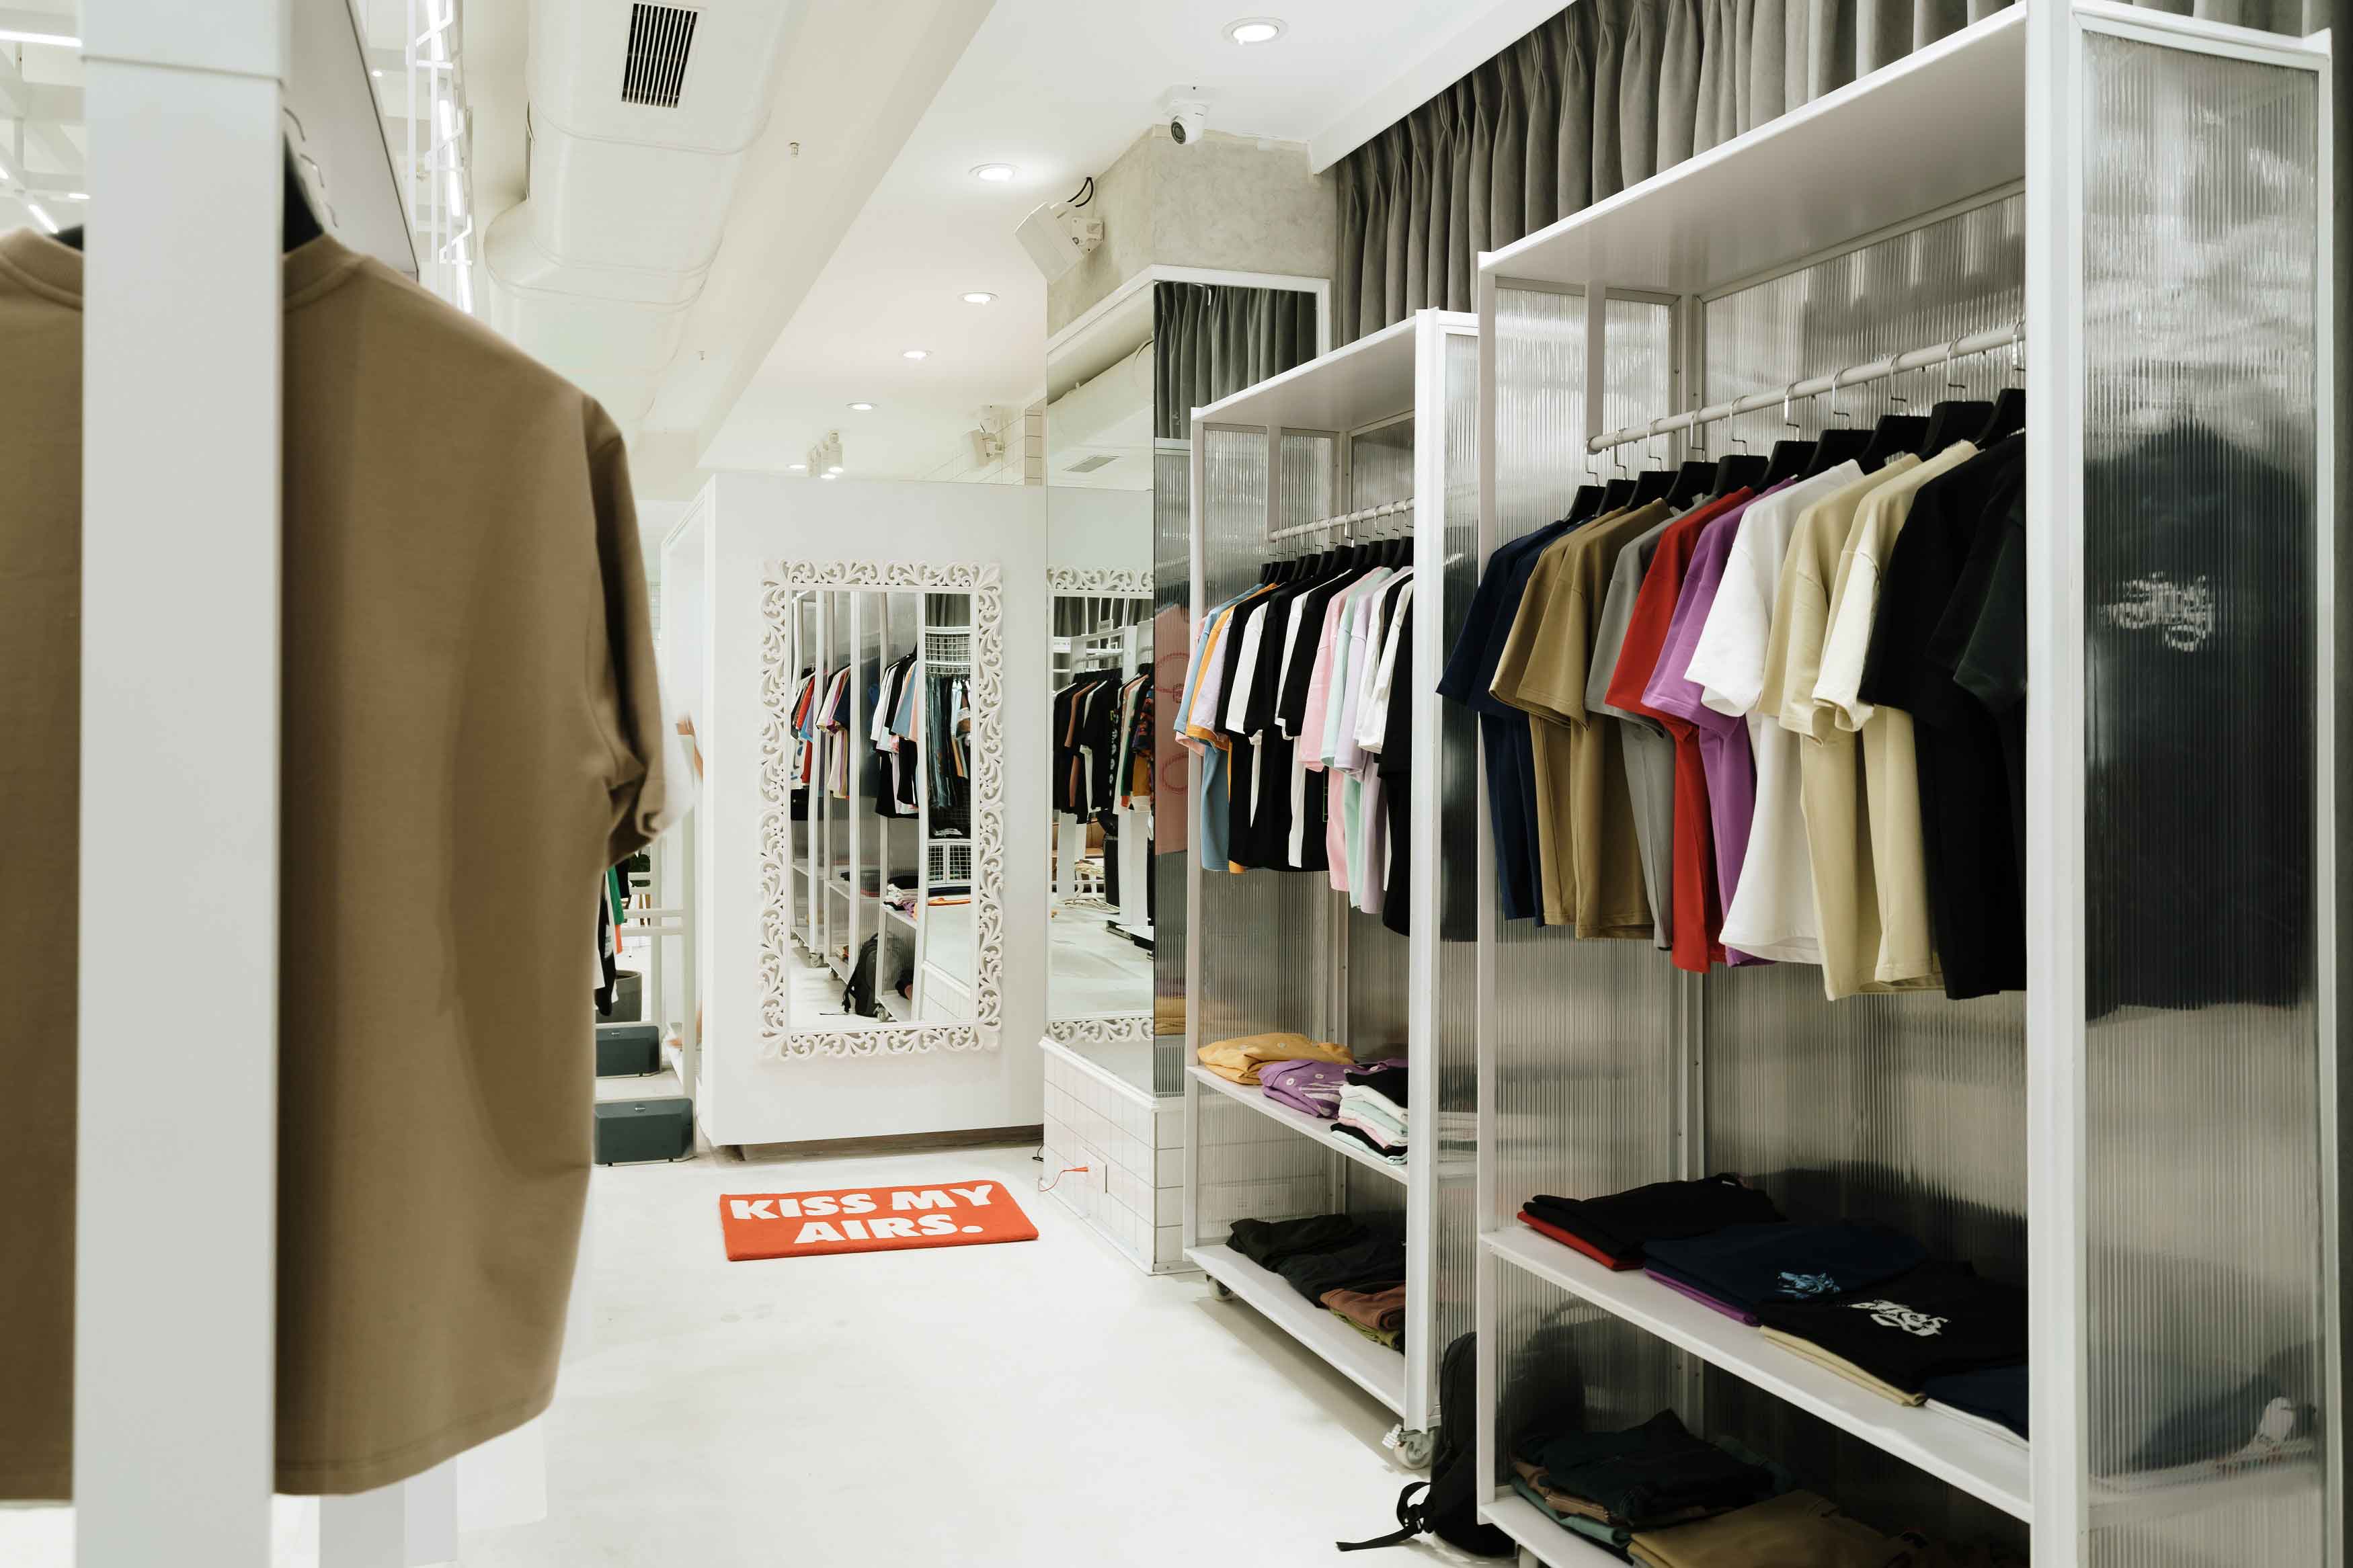 Clothes displayed on fixtures